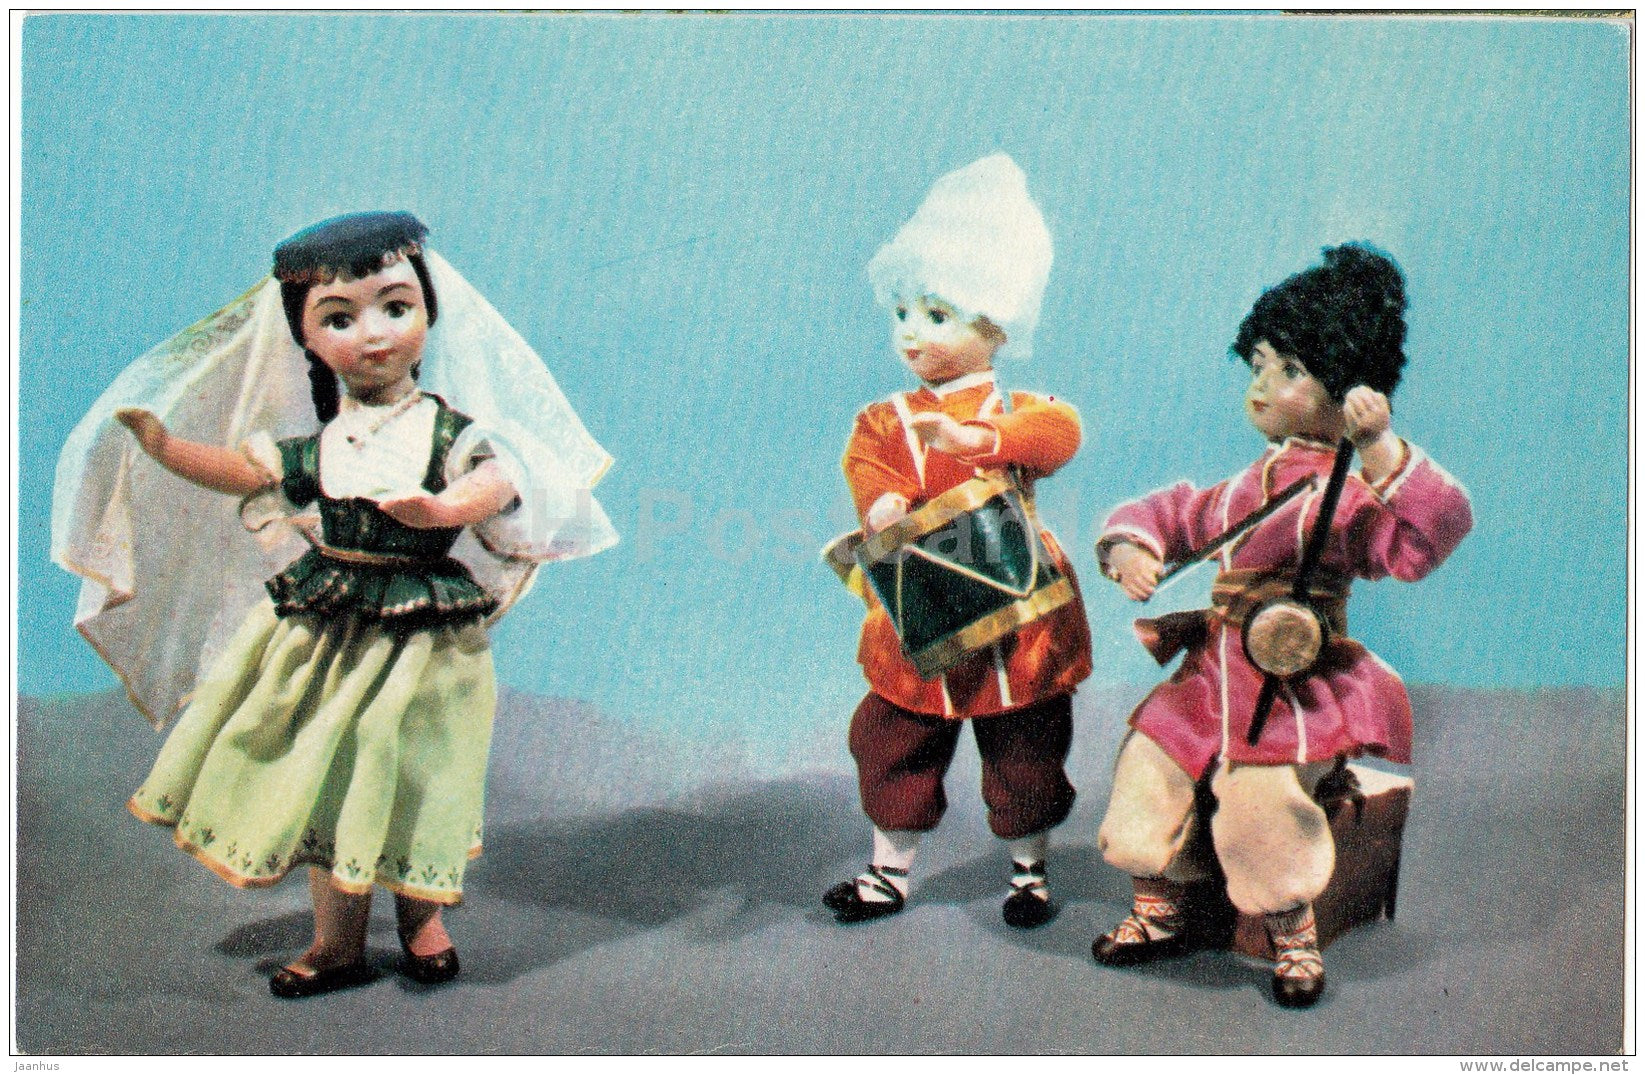 Holiday - knitting - dance - music - dolls in Azerbaijan national costumes - 1967 - Russia USSR - unused - JH Postcards